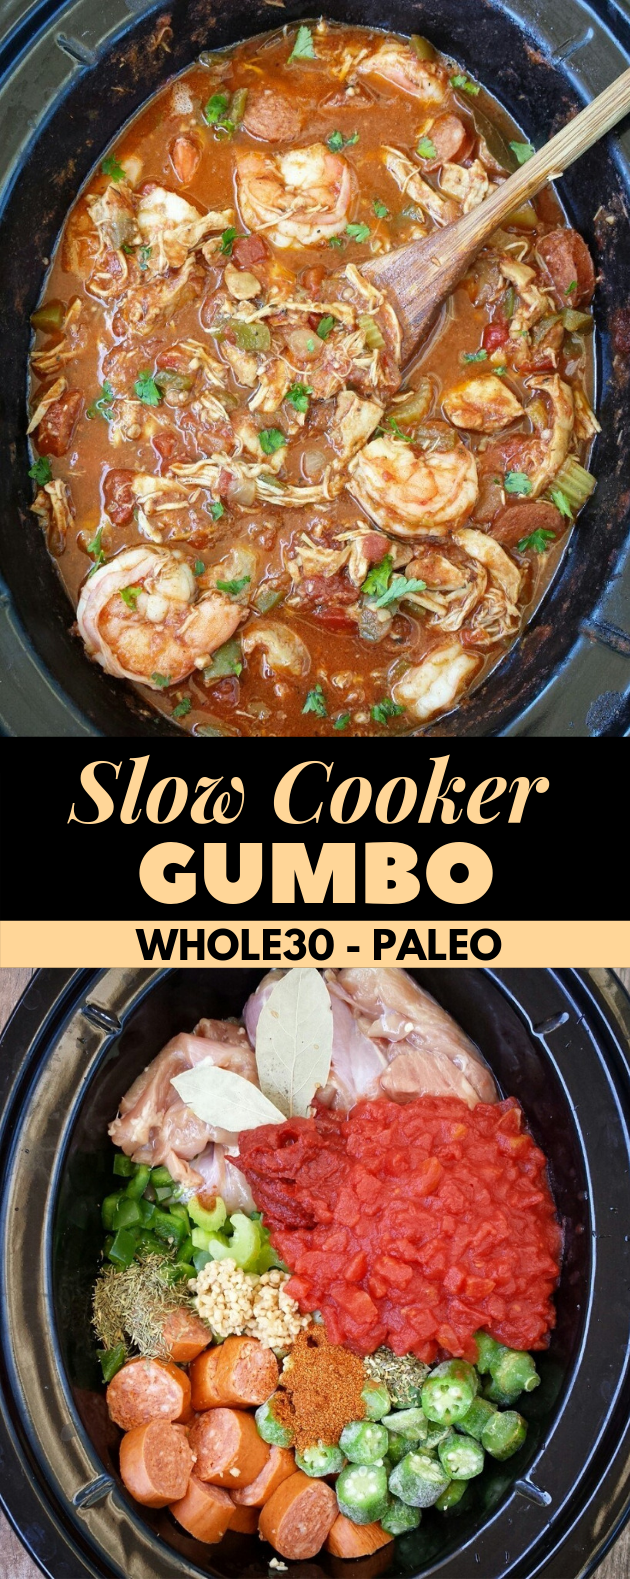 SLOW COOKER GUMBO (WHOLE30, PALEO) #diet #healthy